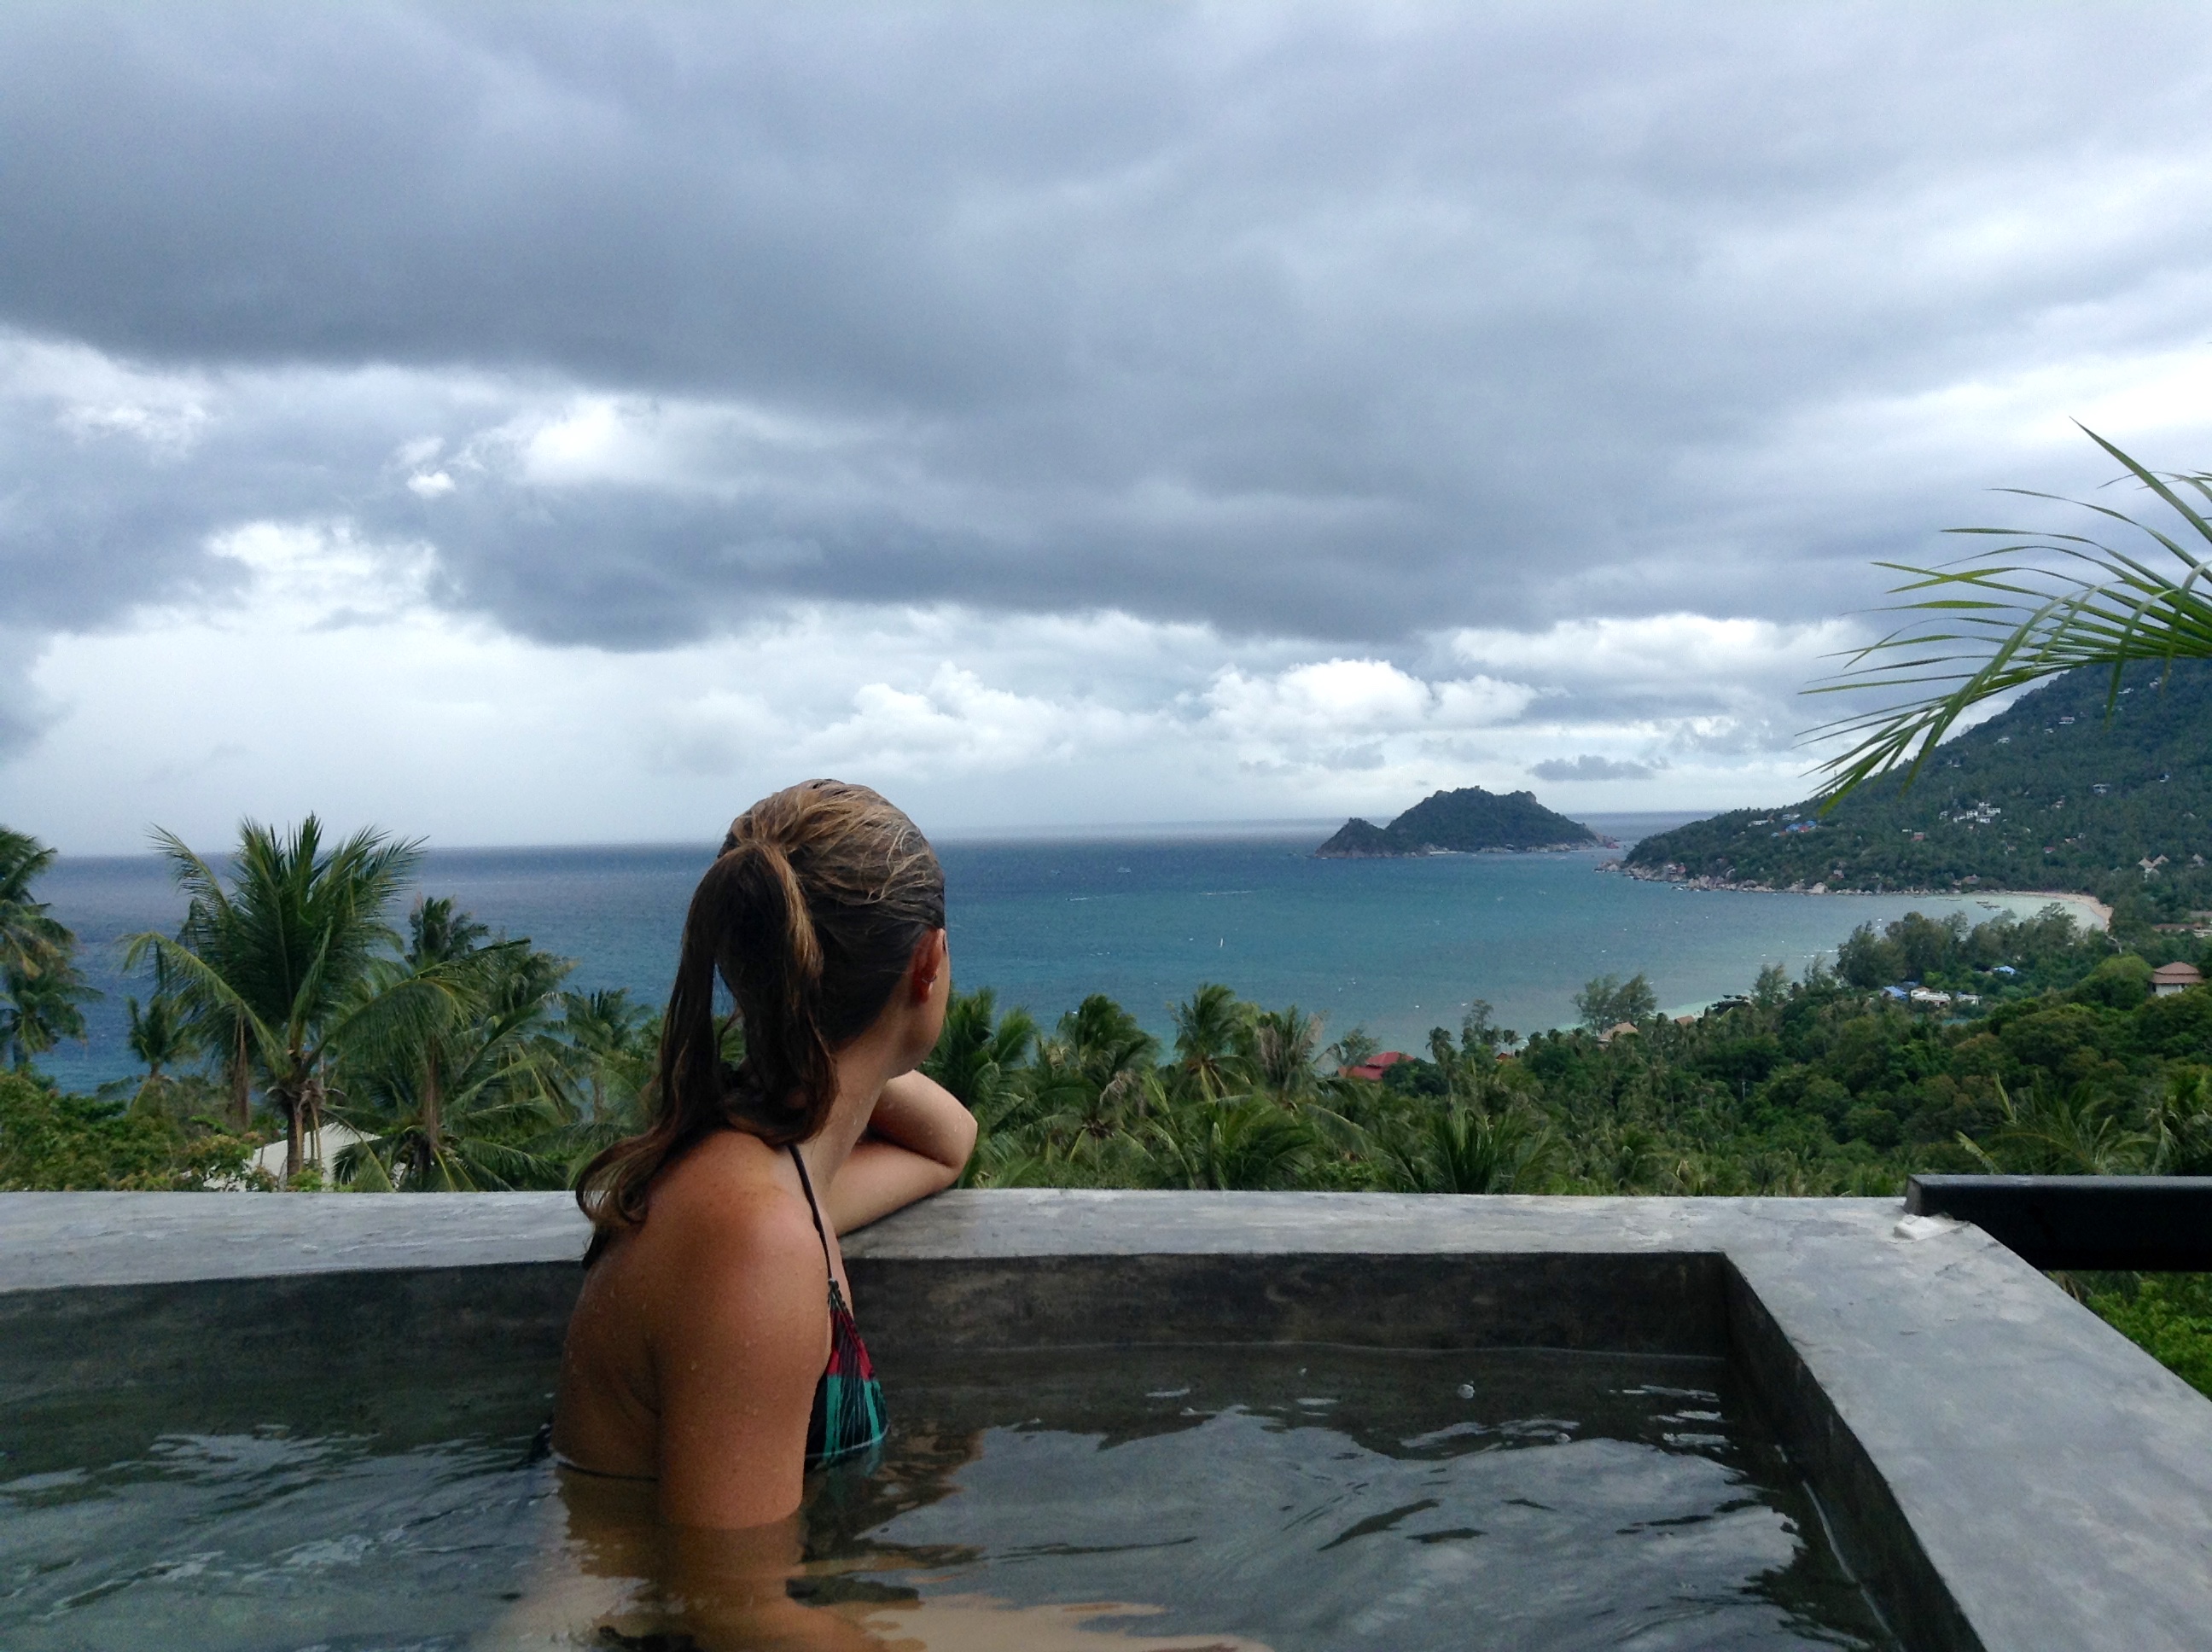 Me looking out at Koh Nang Yuan from our pool in Koh Tao, Thailand